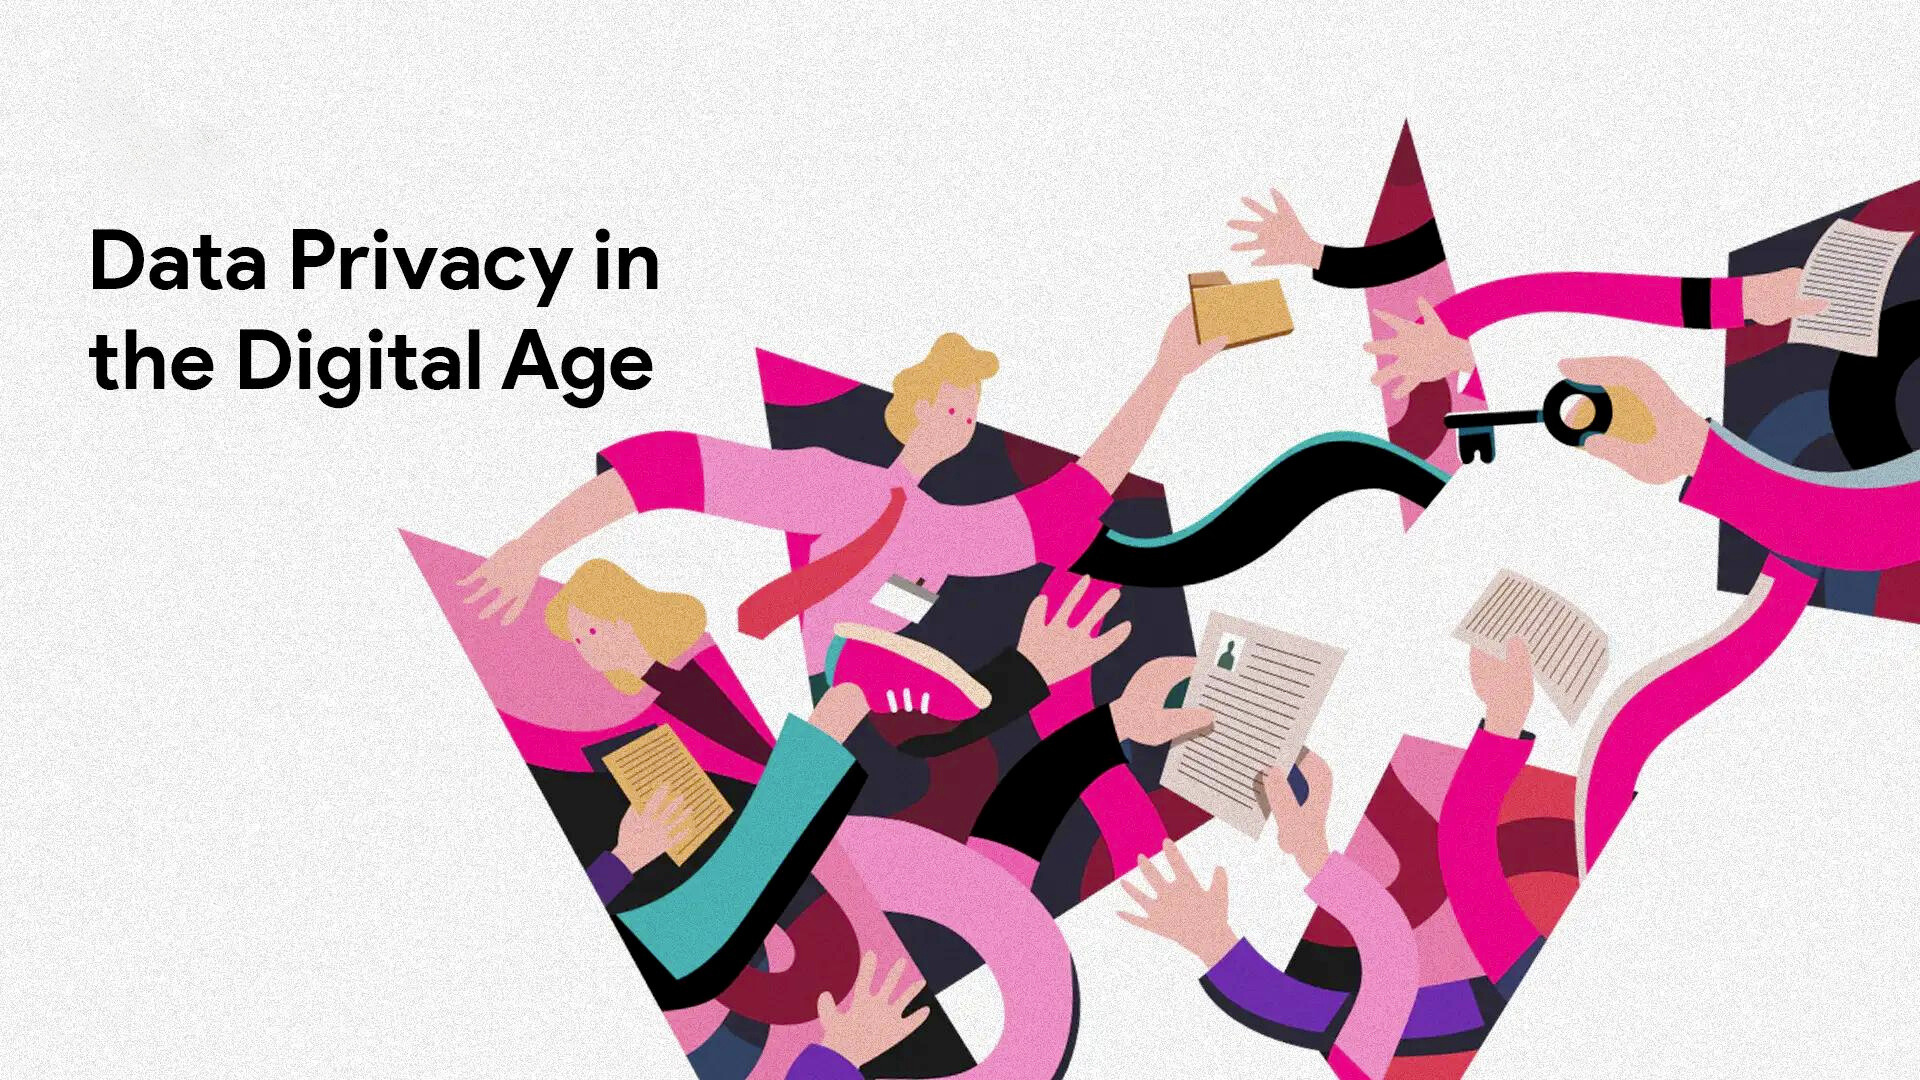 Data Privacy in the Digital Age